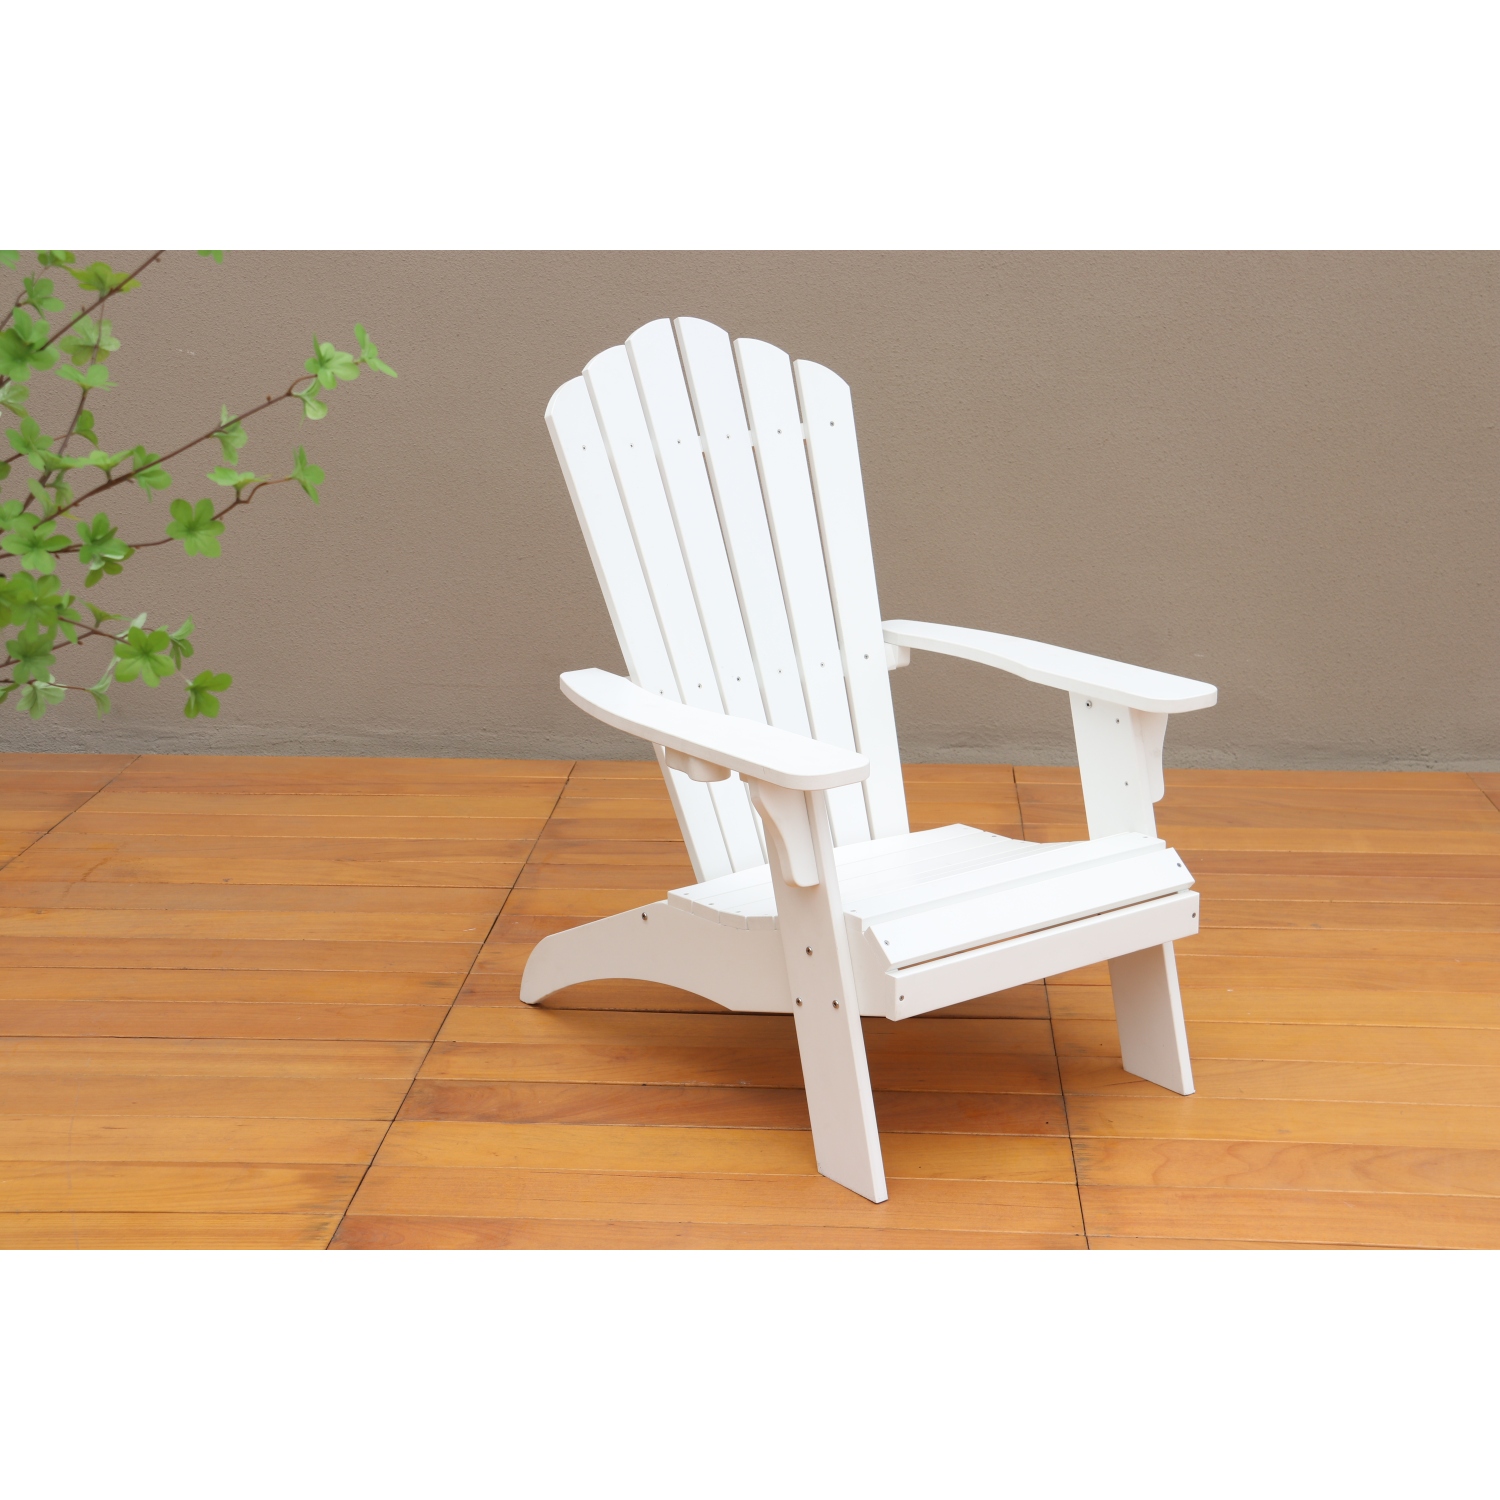 SUGIFT Adirondack Chair Backyard Outdoor Furniture,Patio Seating with Cup Holder,Fade-Resistant Plastic Wood for Lawn Patio Deck Garden Porch Lawn Furniture Chair,White - image 4 of 8